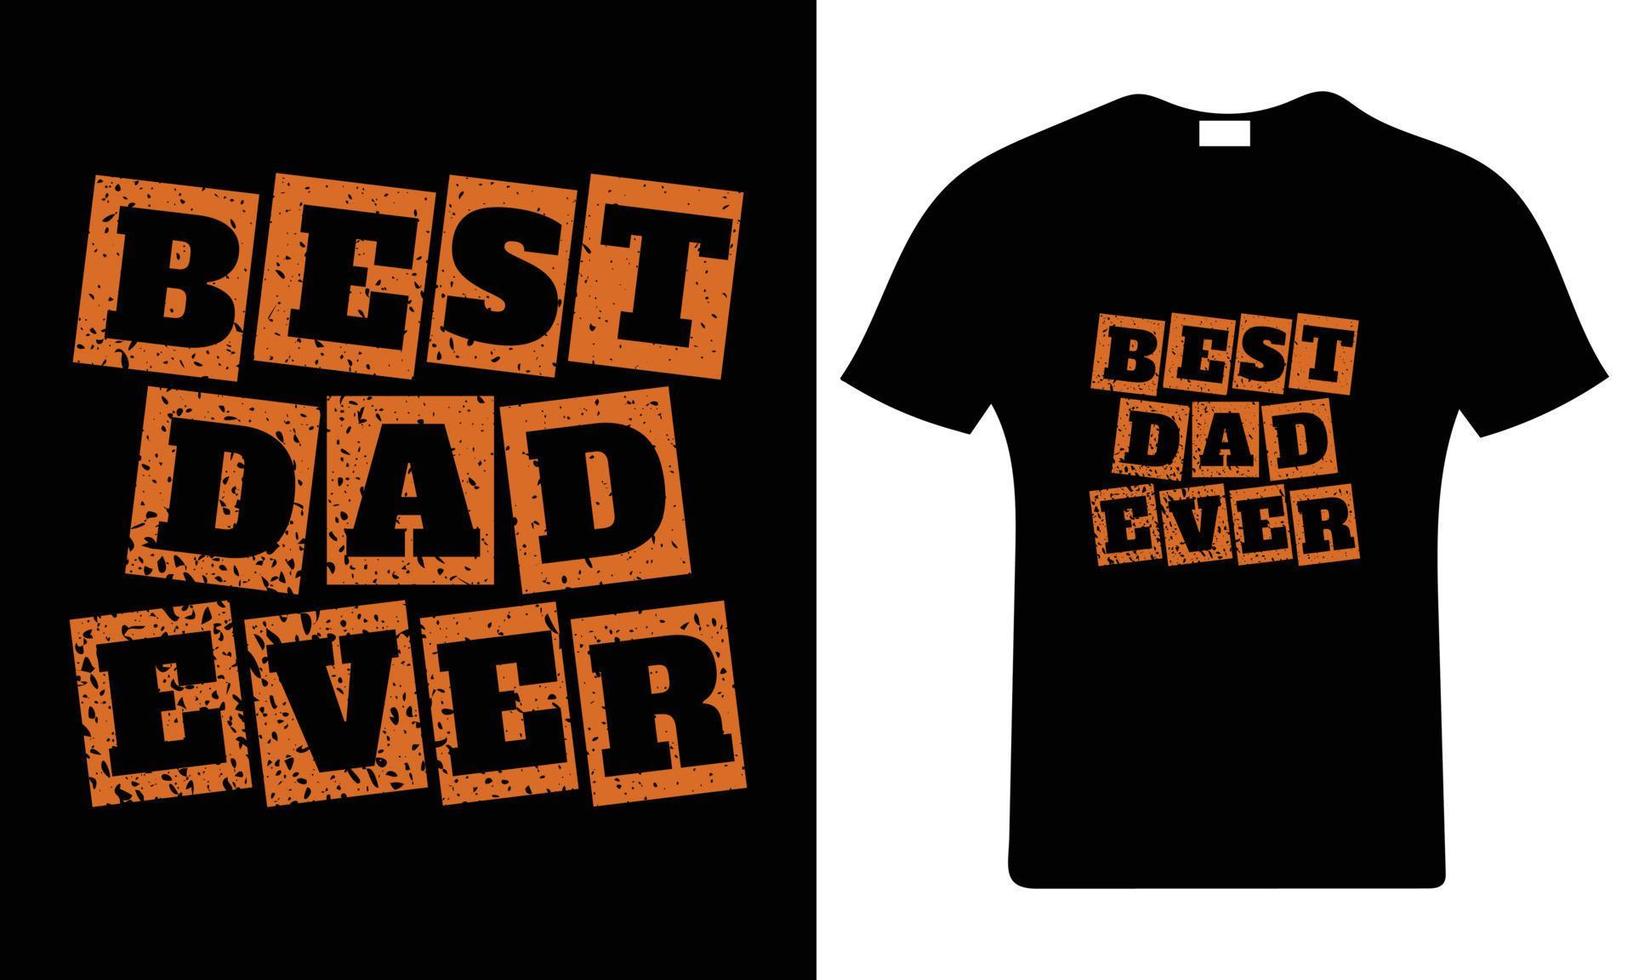 Best Dad Ever. Happy father's day t-shirt. Dad t shirt vector. Fatherhood gift shirt design. vector